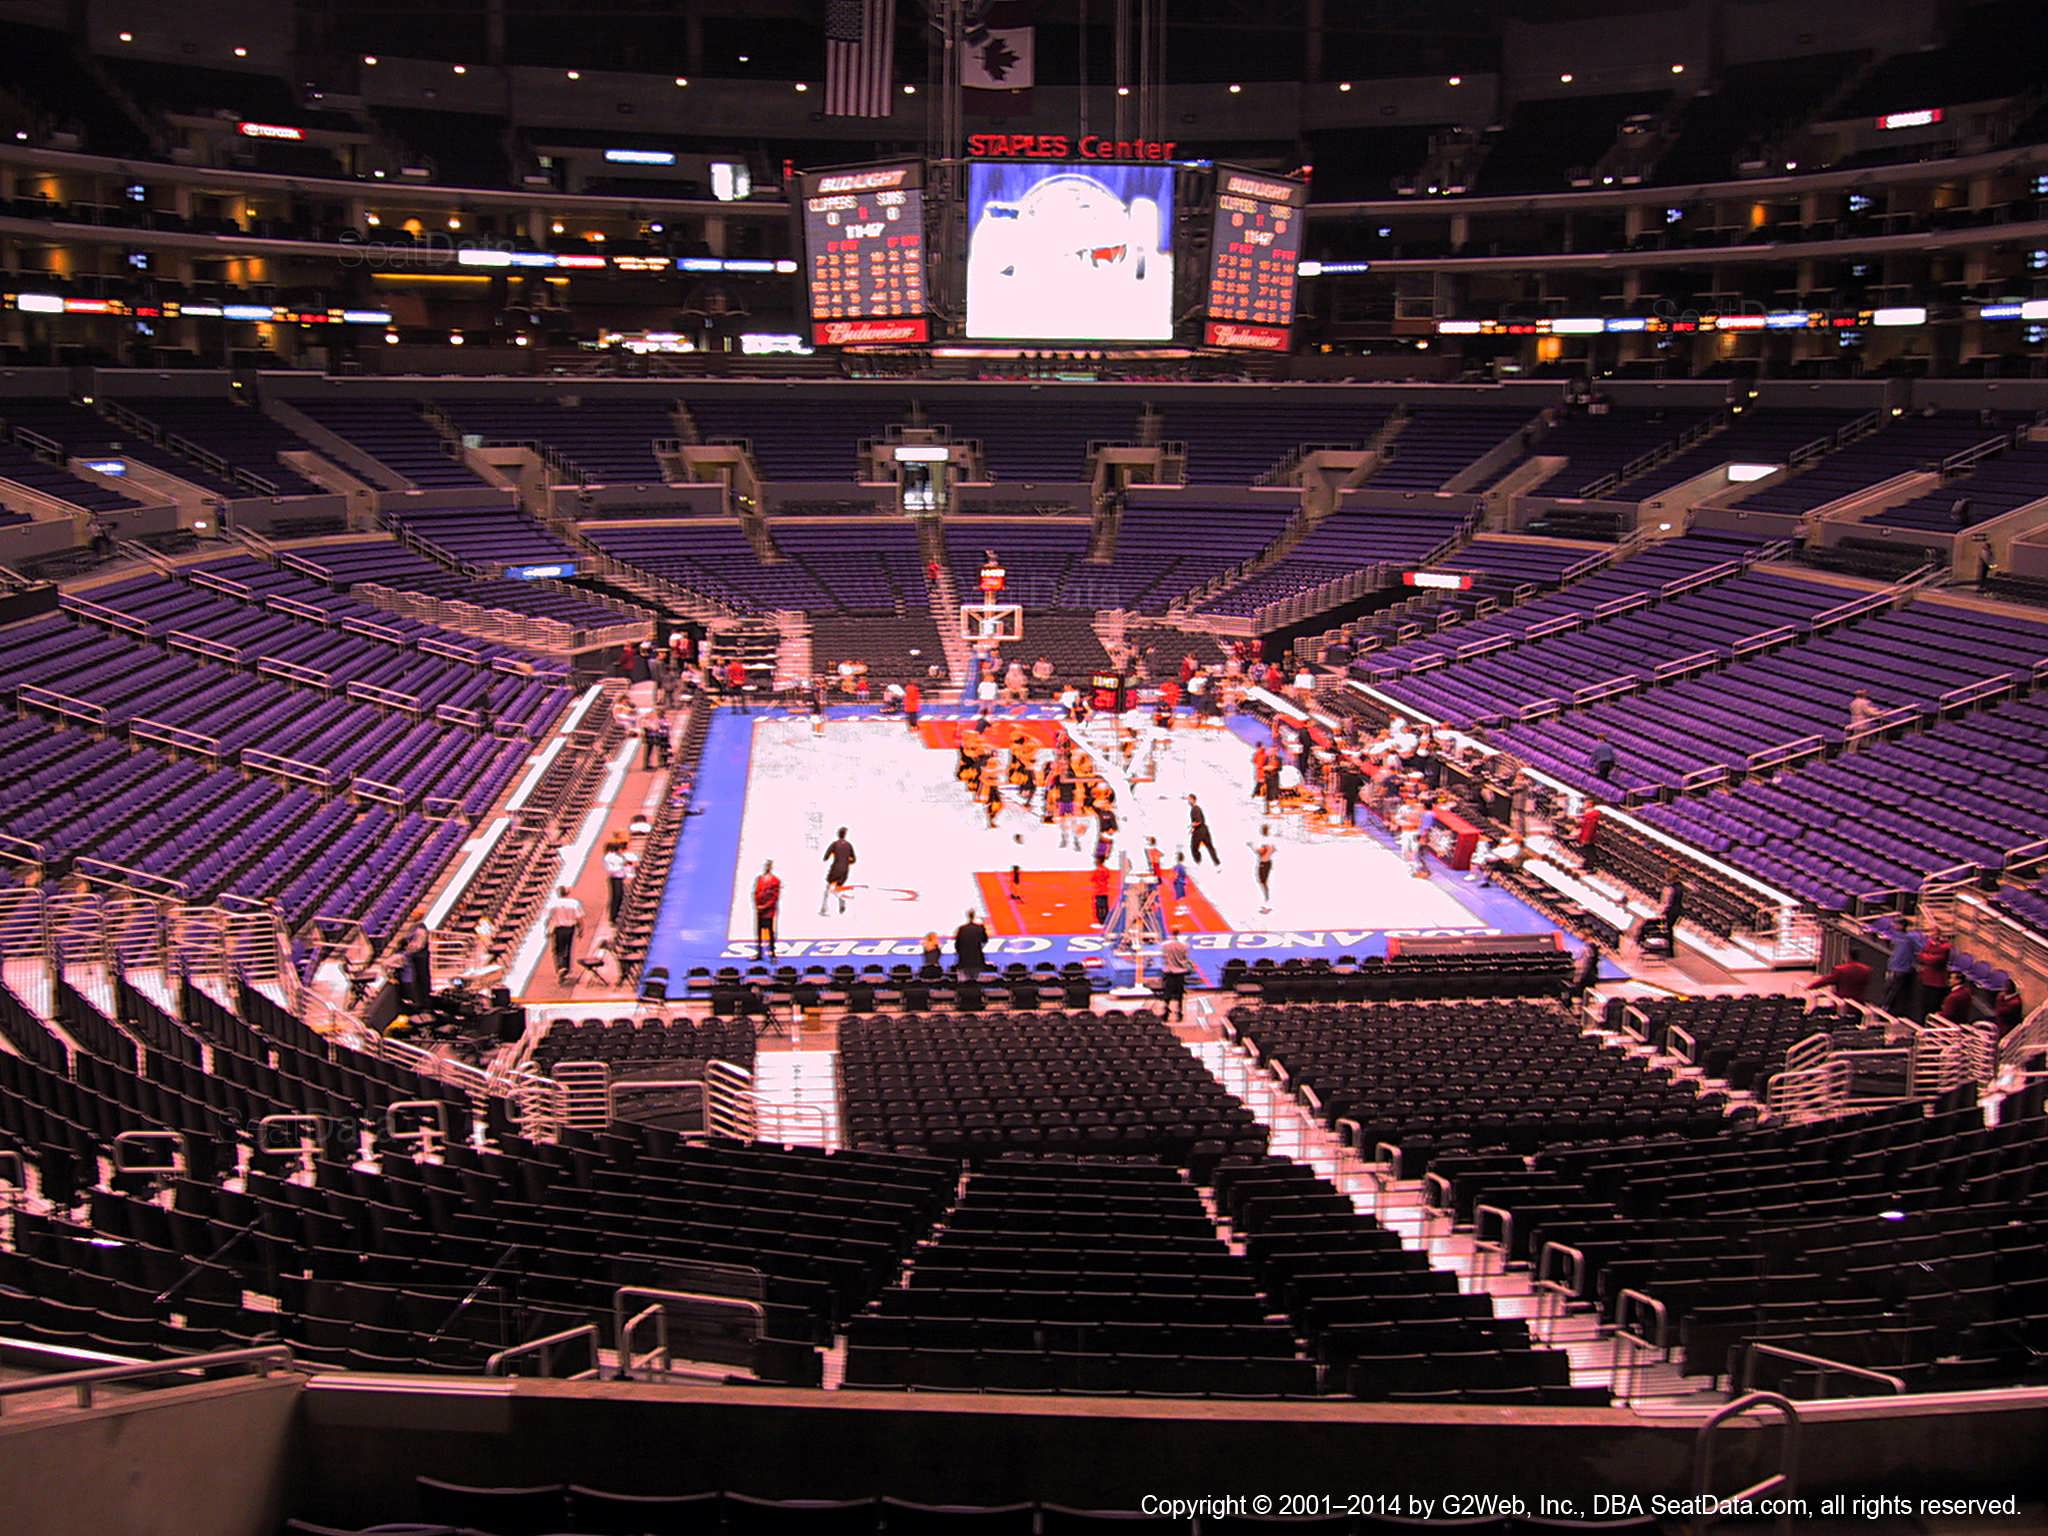 Staples Center Section 208 - Clippers/Lakers - RateYourSeats.com